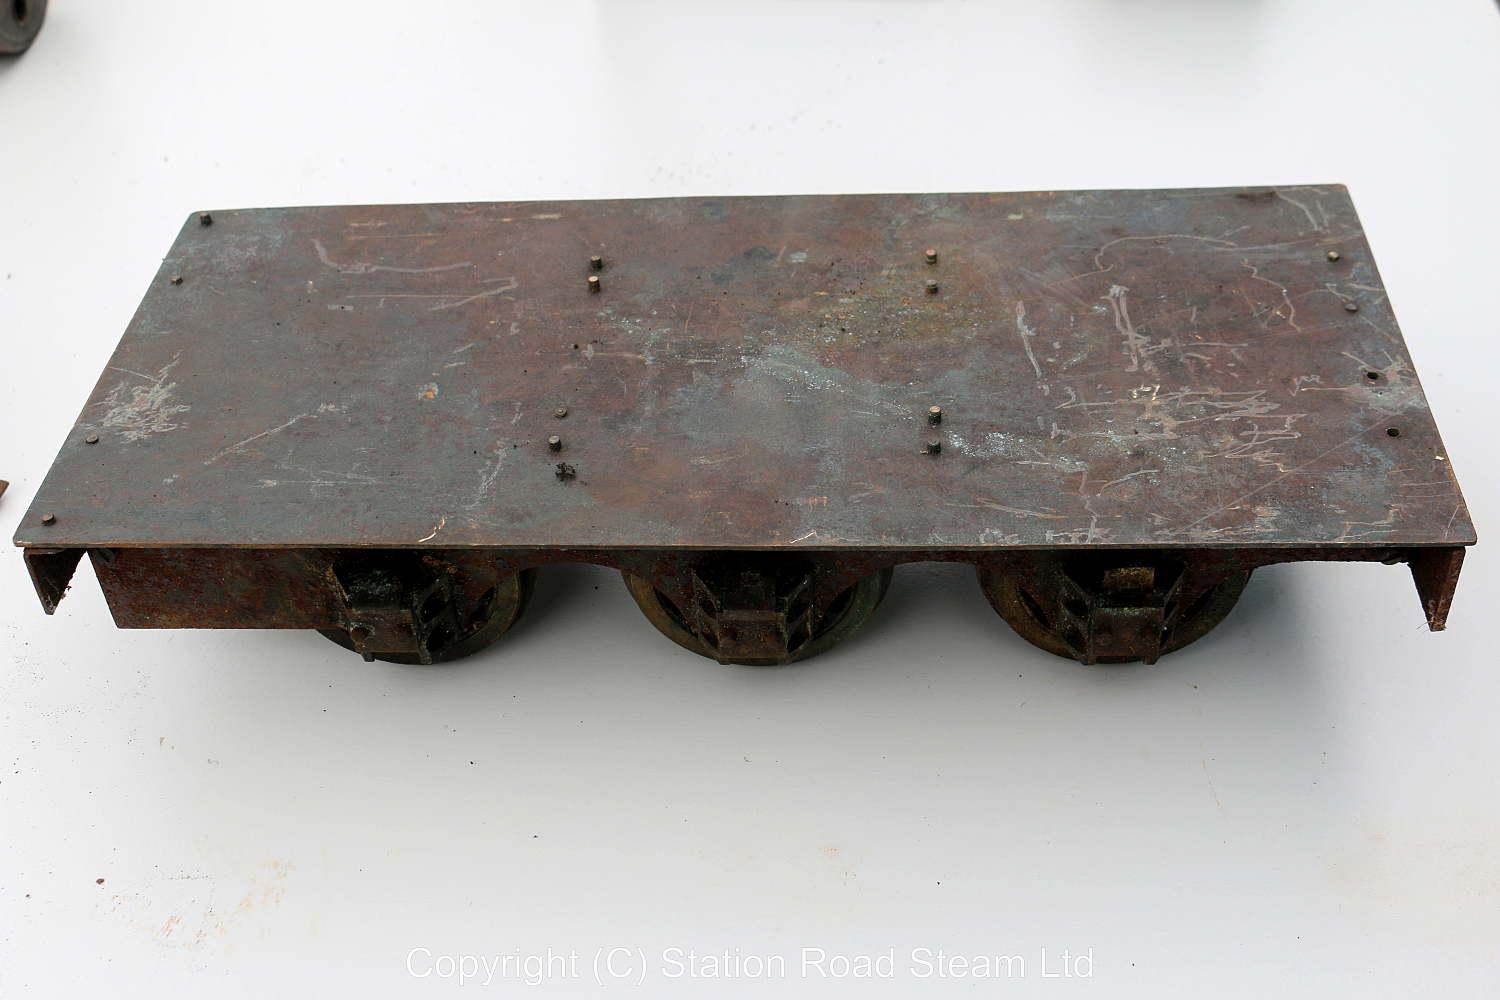 Ancient 3 1/2 inch gauge Atlantic chassis with boiler